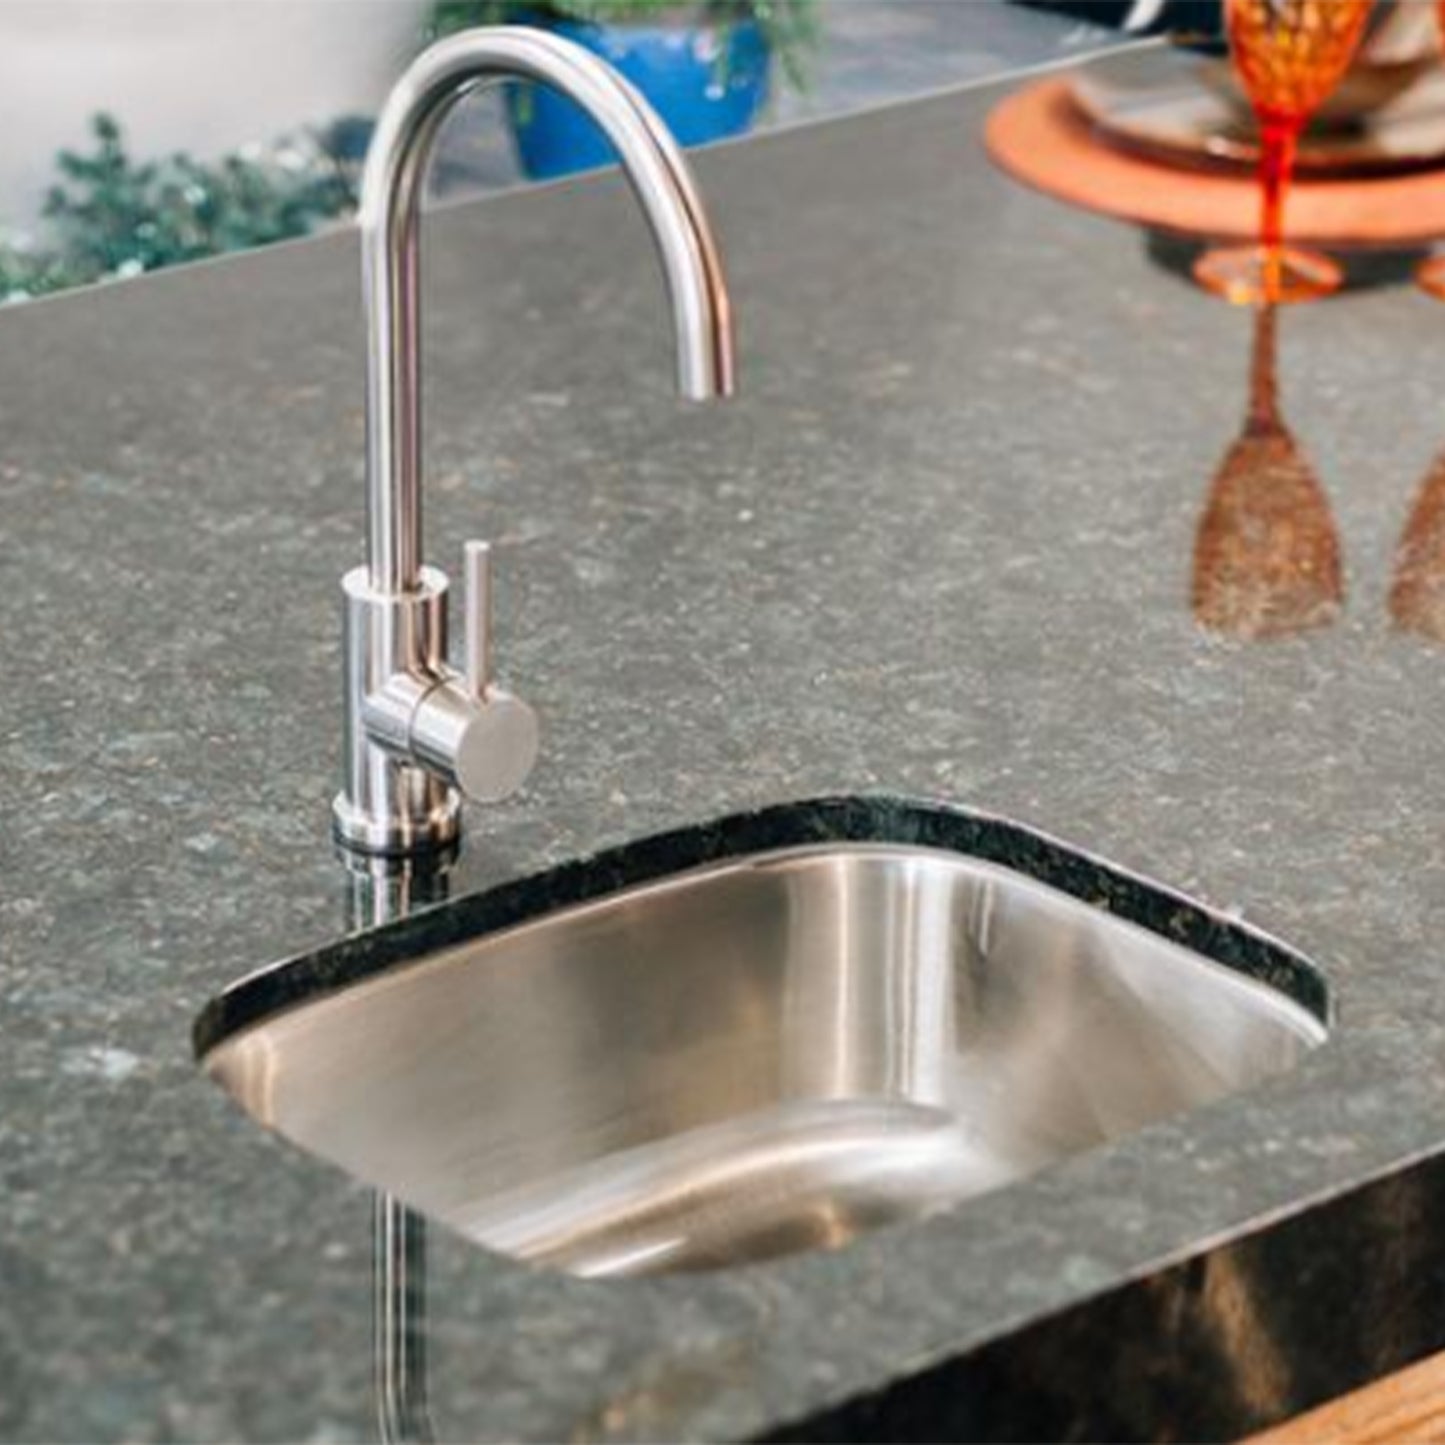 Summerset 19-Inch Stainless Steel Undermount Sink & 360º Hot/Cold Faucet